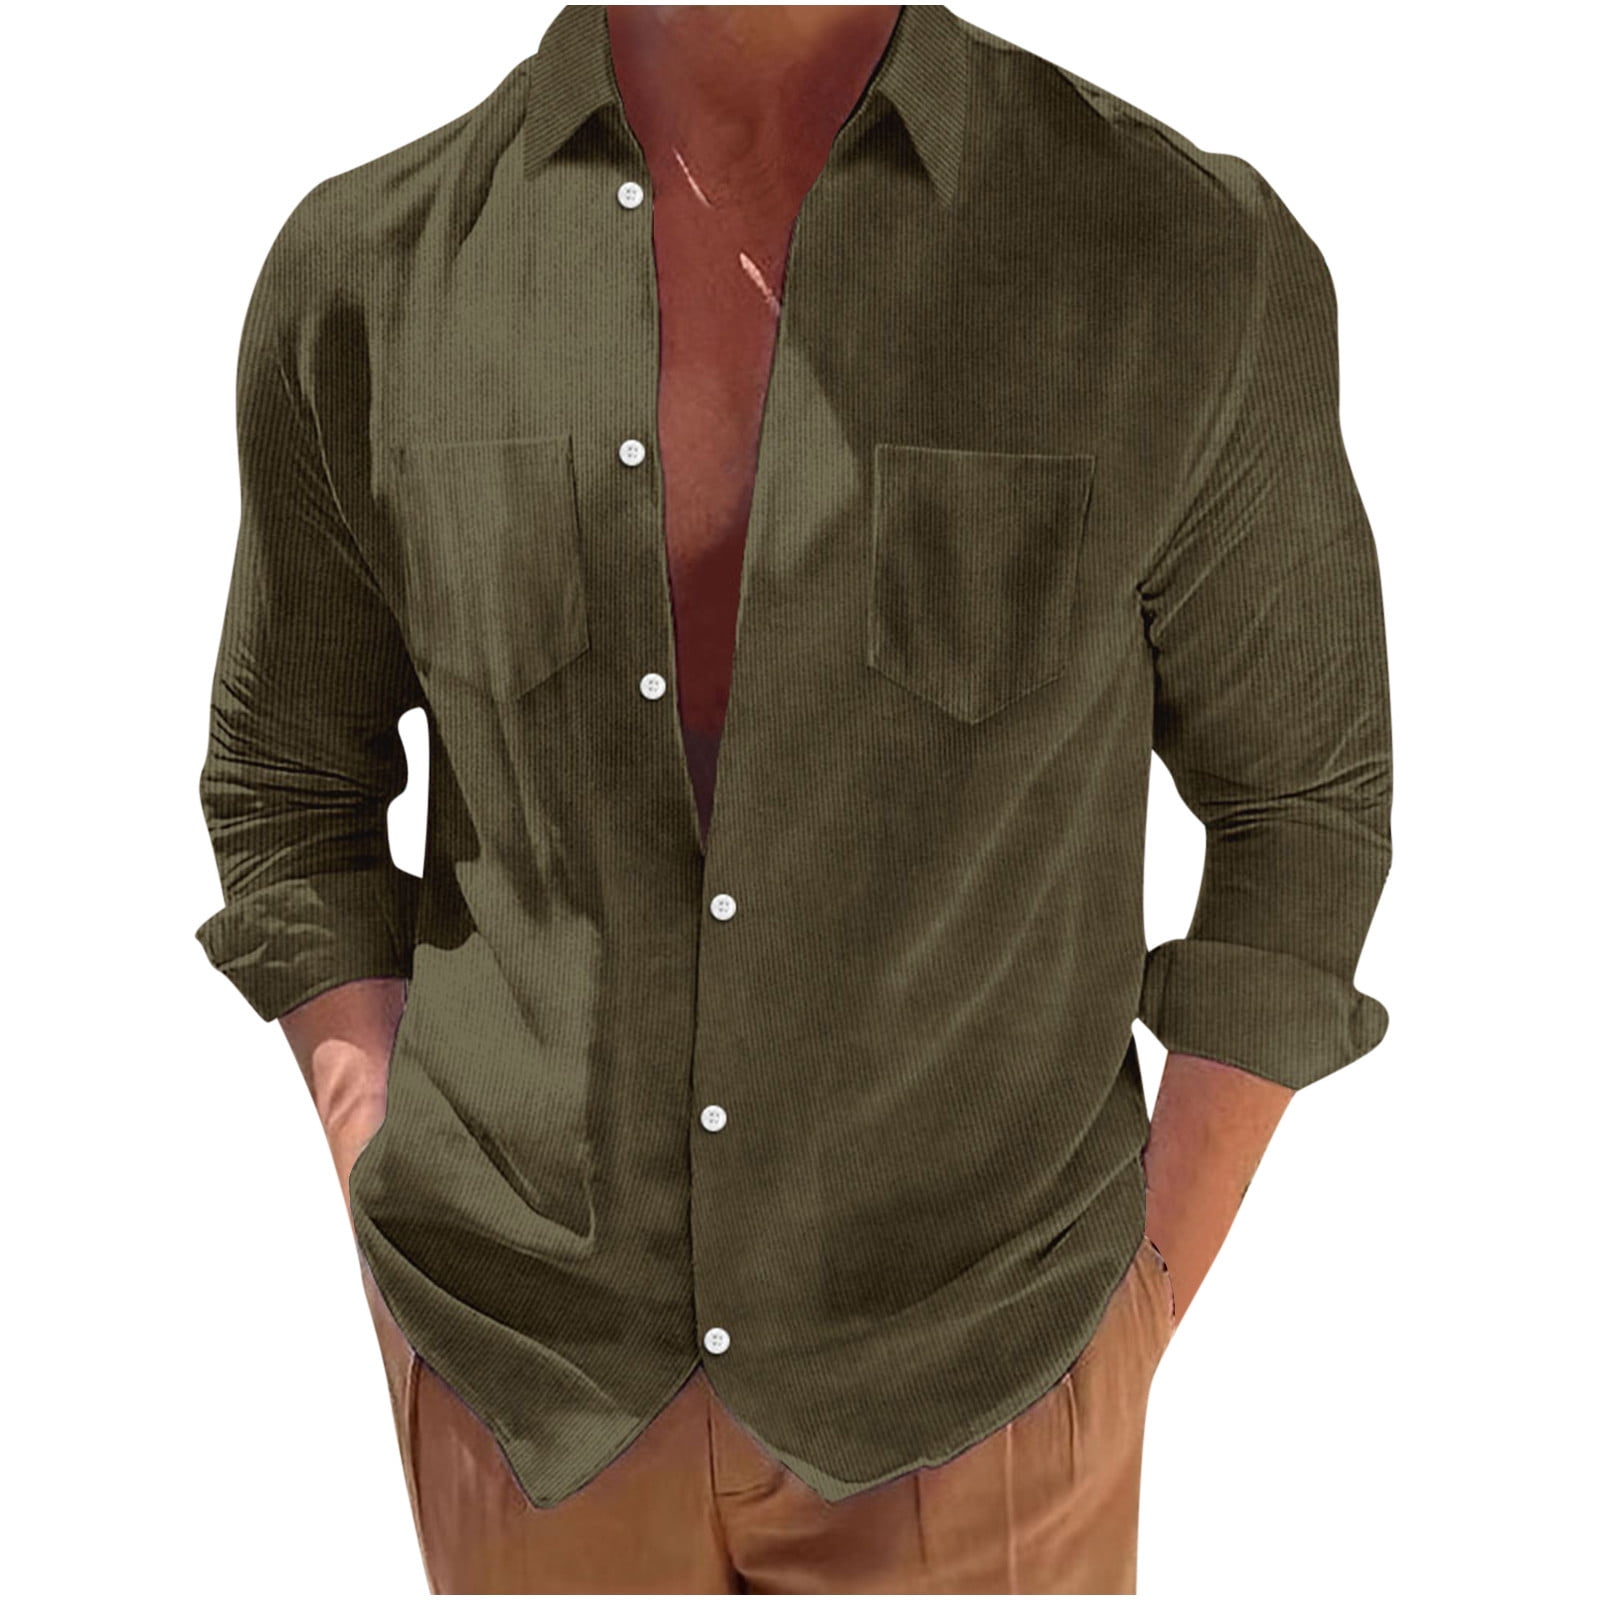 VSSSJ Button Down Shirts for Men Big and Tall Solid Color Long Sleeve  Collared Tshirts with Pocket Fall Winter Comfy Silky Cardigan Tops Army  Green